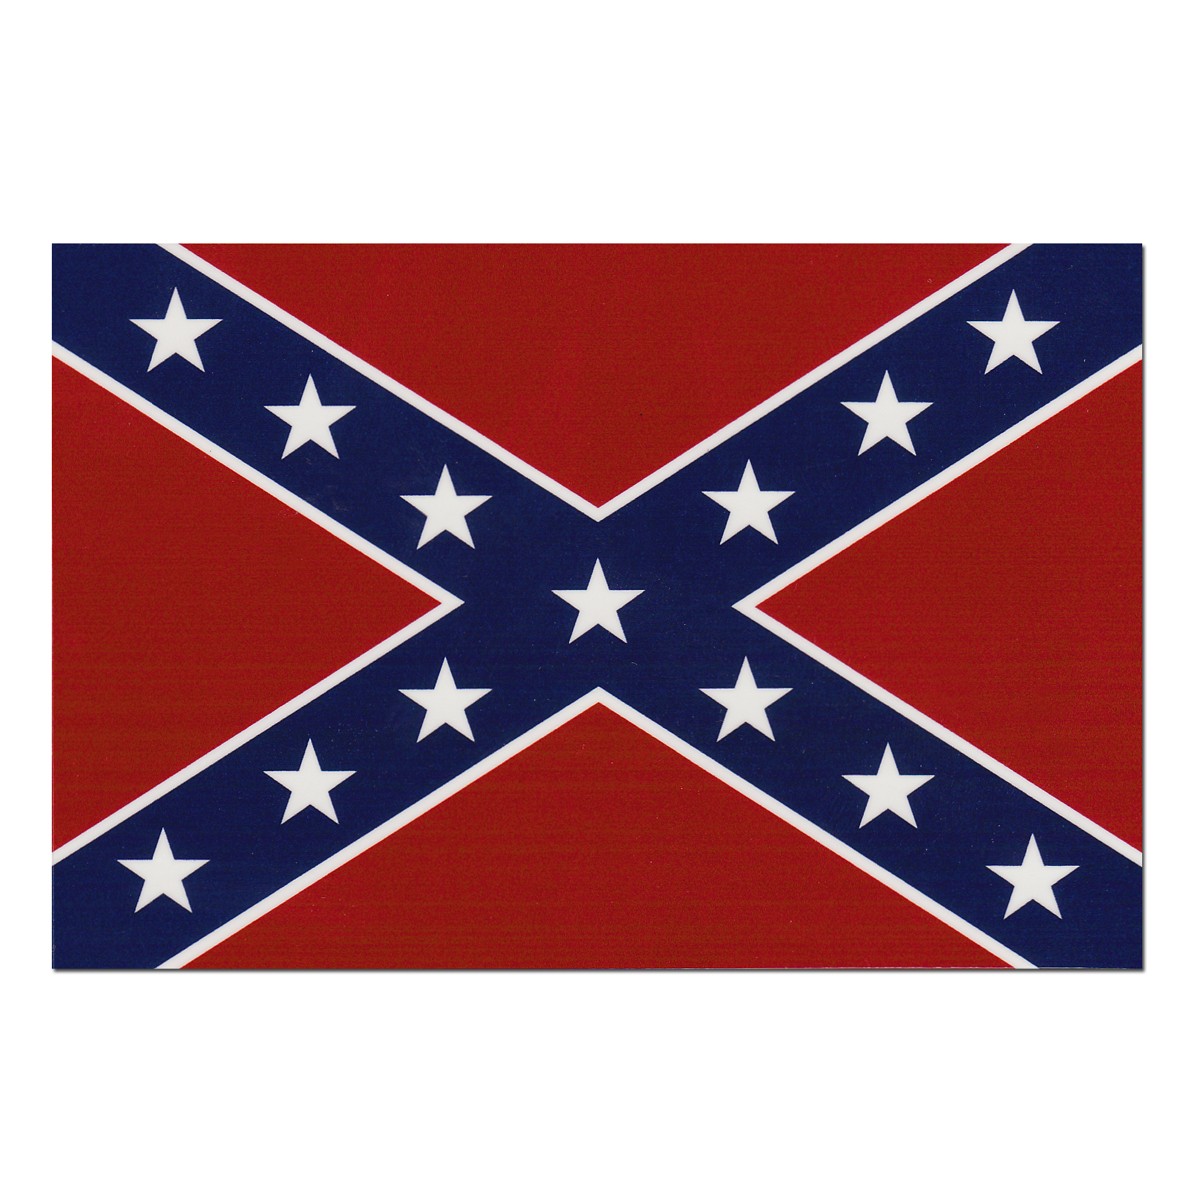 confederate flag text art copy and paste